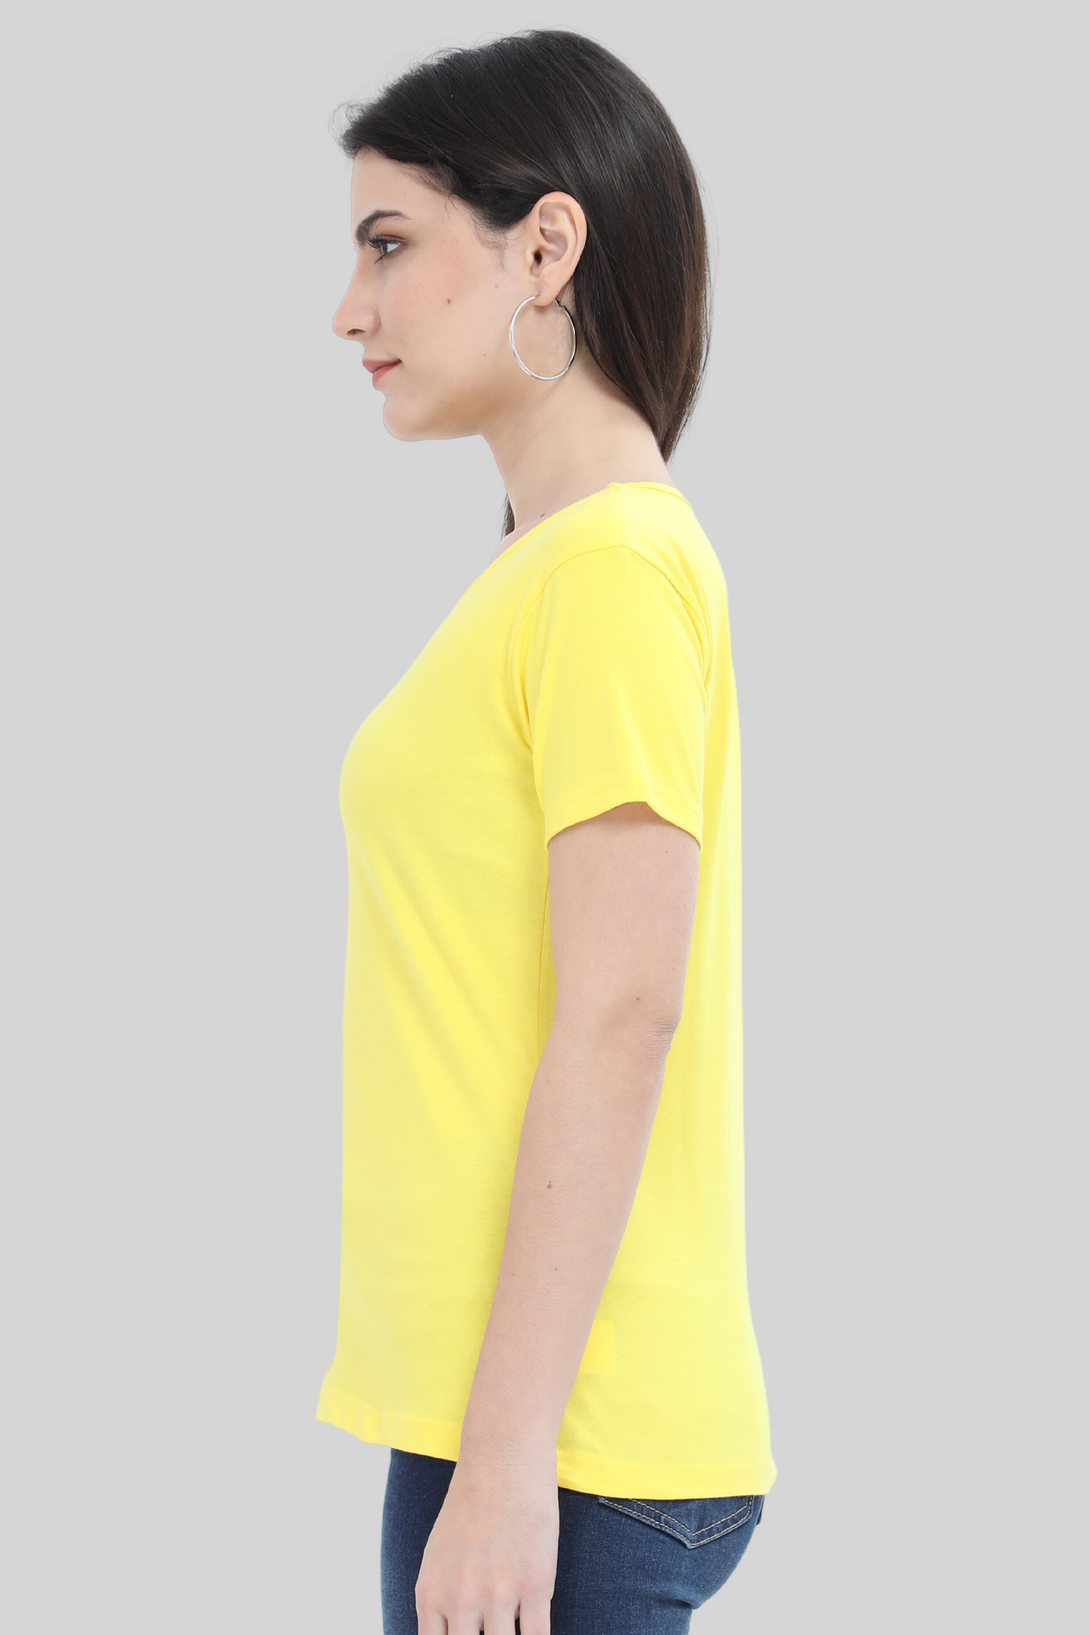 Bright Yellow Scoop Neck T-Shirt For Women - WowWaves - 3